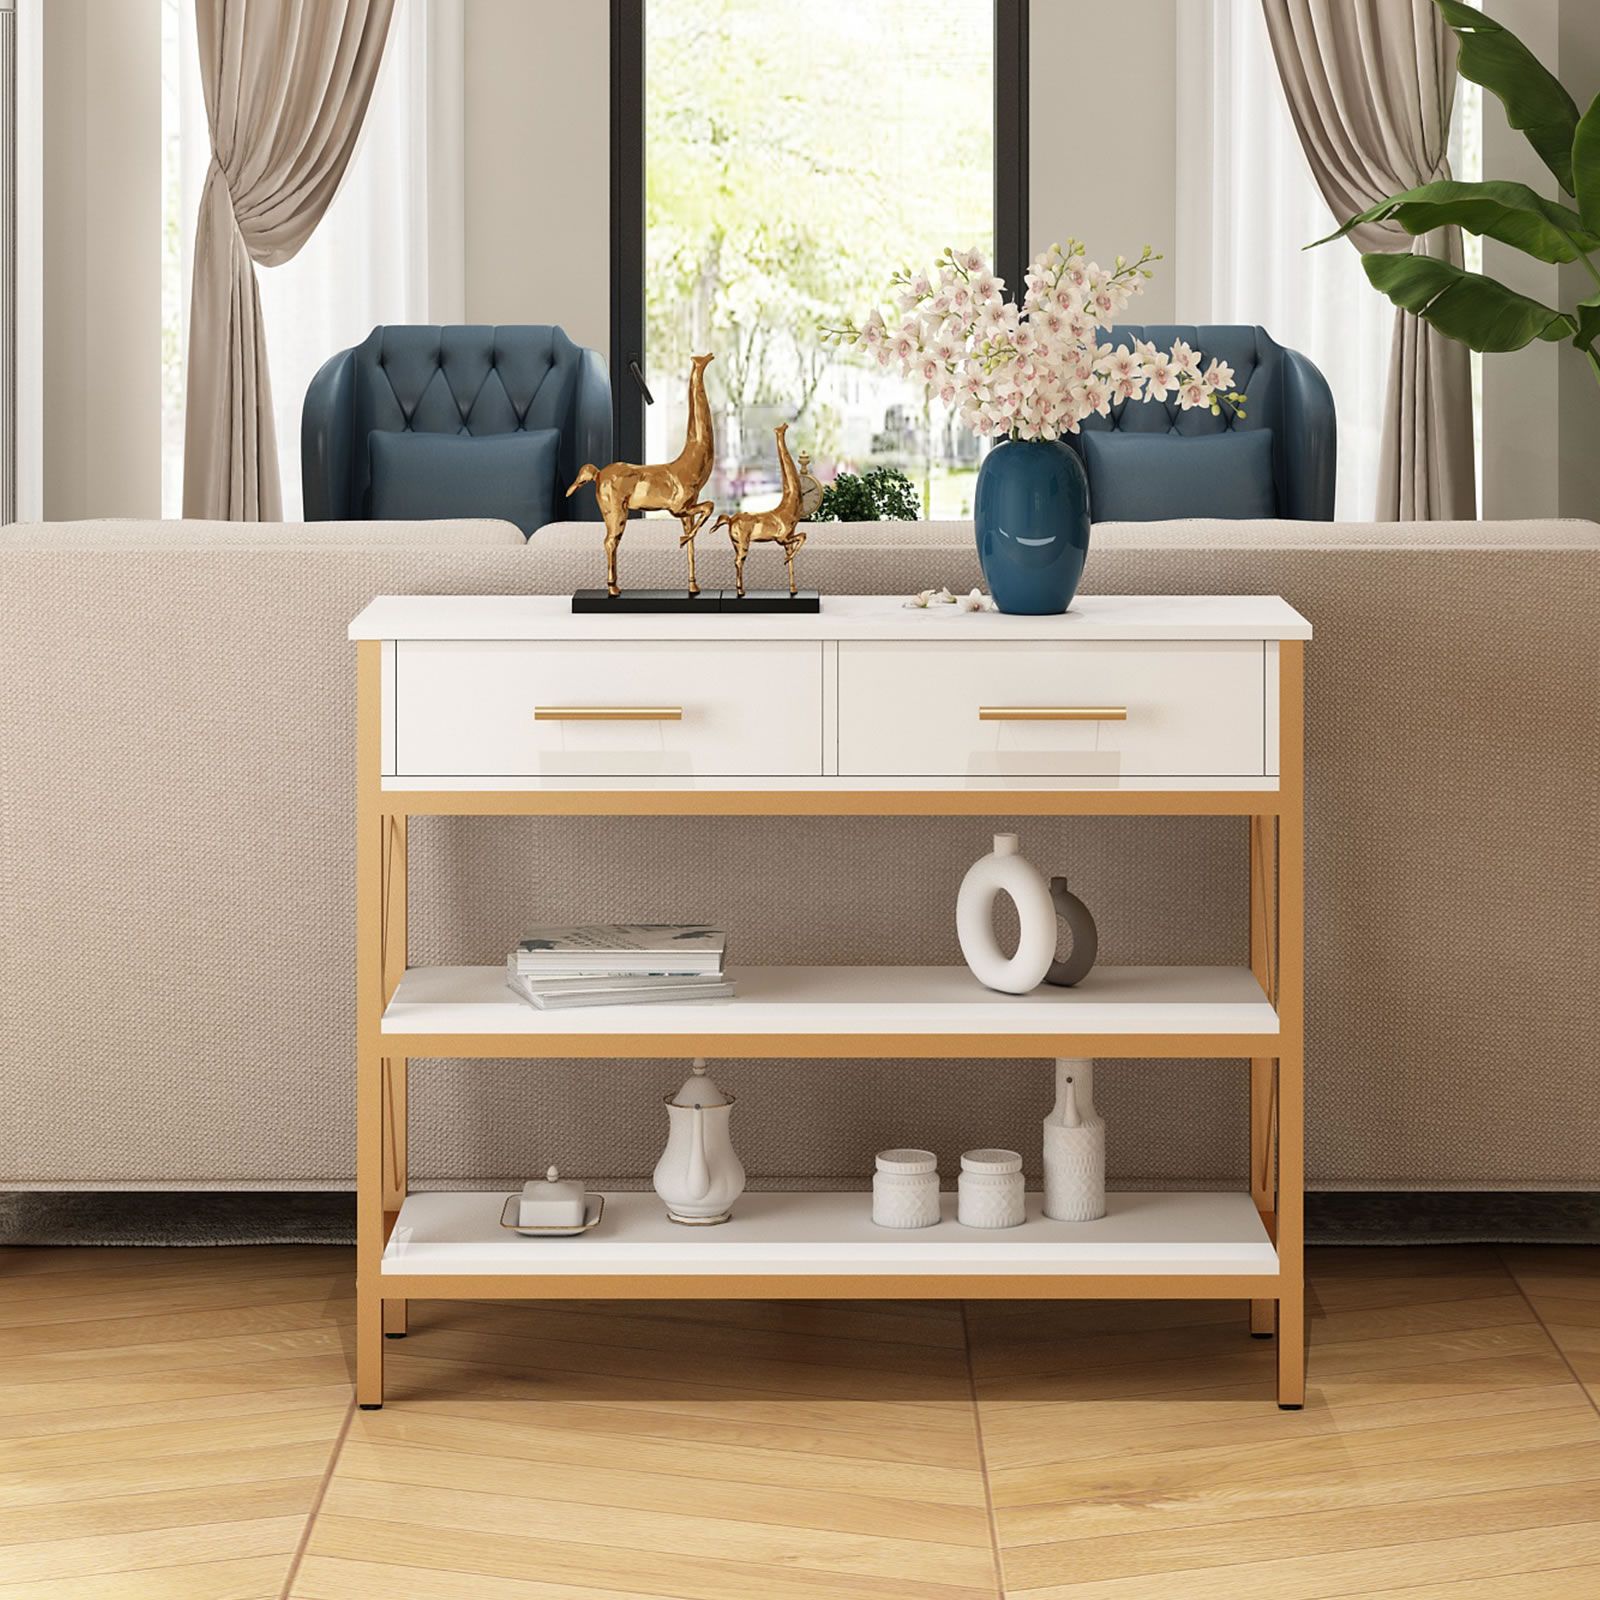 Modern Console Table TV Cabinet Hall Entryway Bar Side Sofa Narrow Long Storage Shelves Drawers Wooden Accent 100x30x80cm